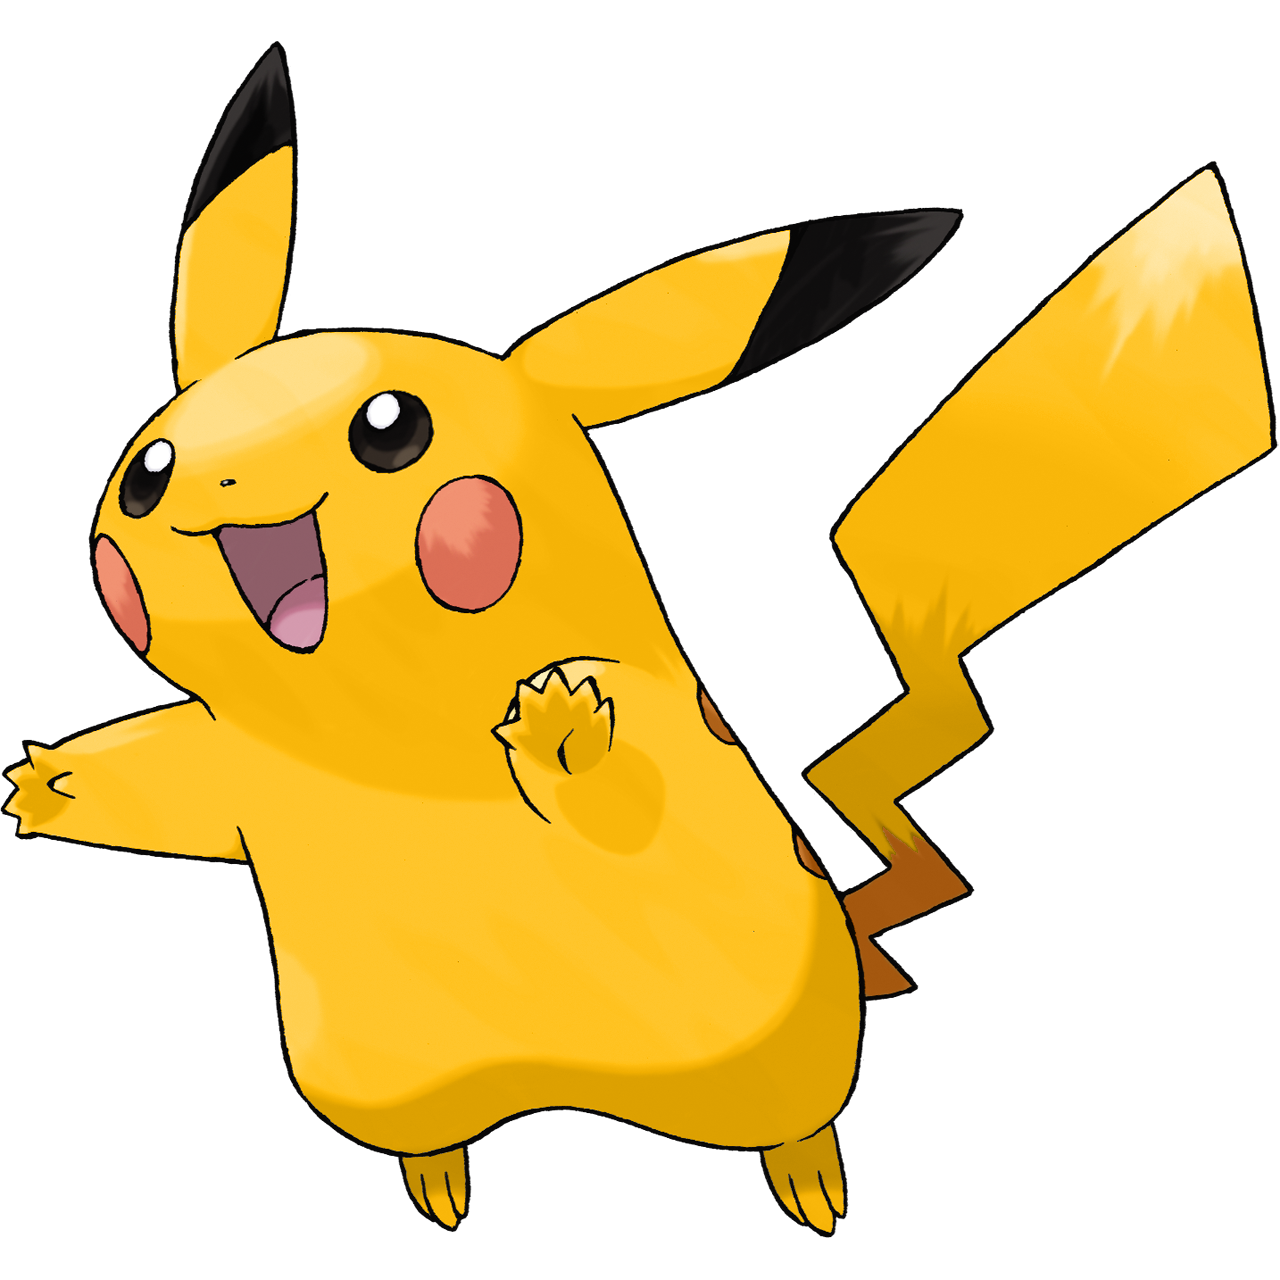 Pokemon Pikachu [PNG] for your project by ZOomERart on DeviantArt